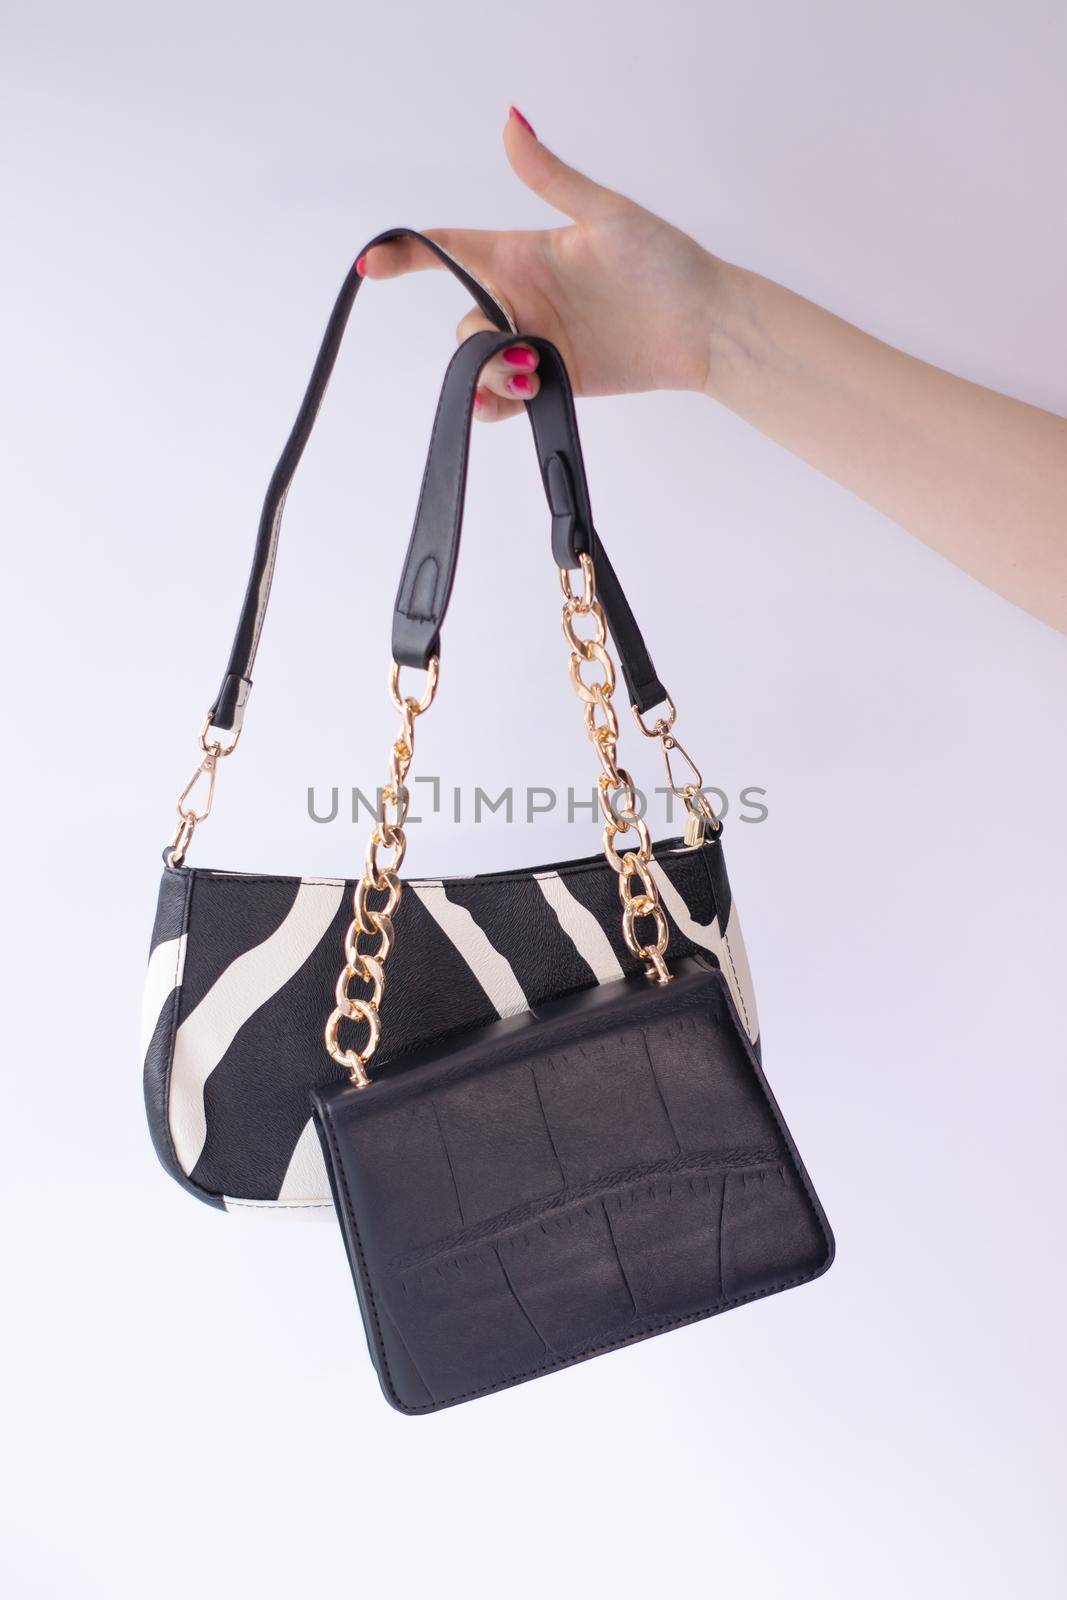 close up of womans hand holding fashionable little black bag. Product photography. stylish handbag and purse for women by oliavesna